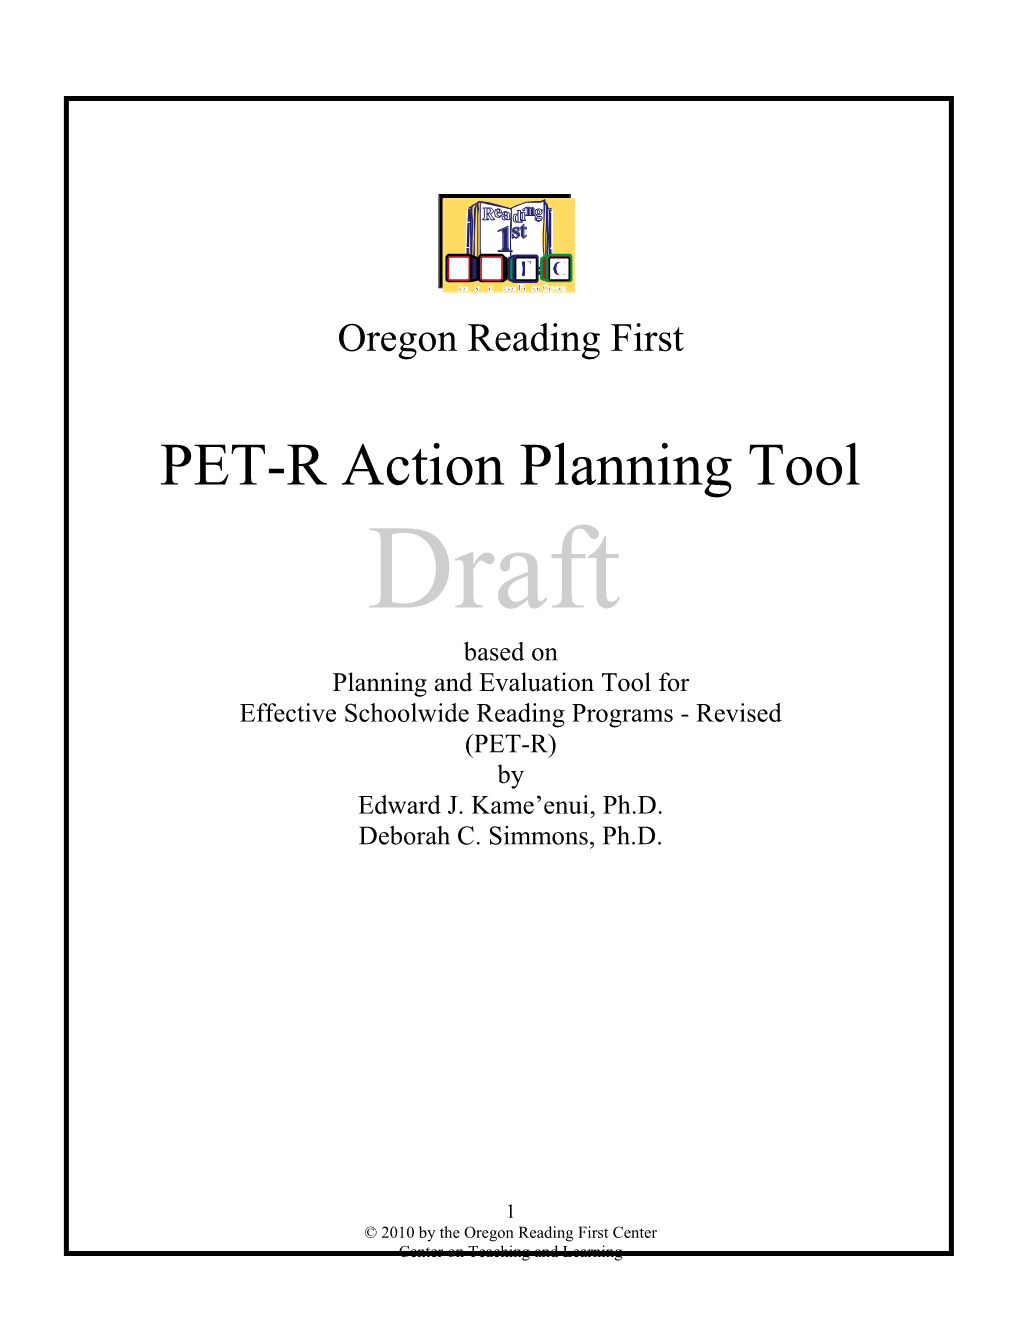 PET-R Action Planning Tool